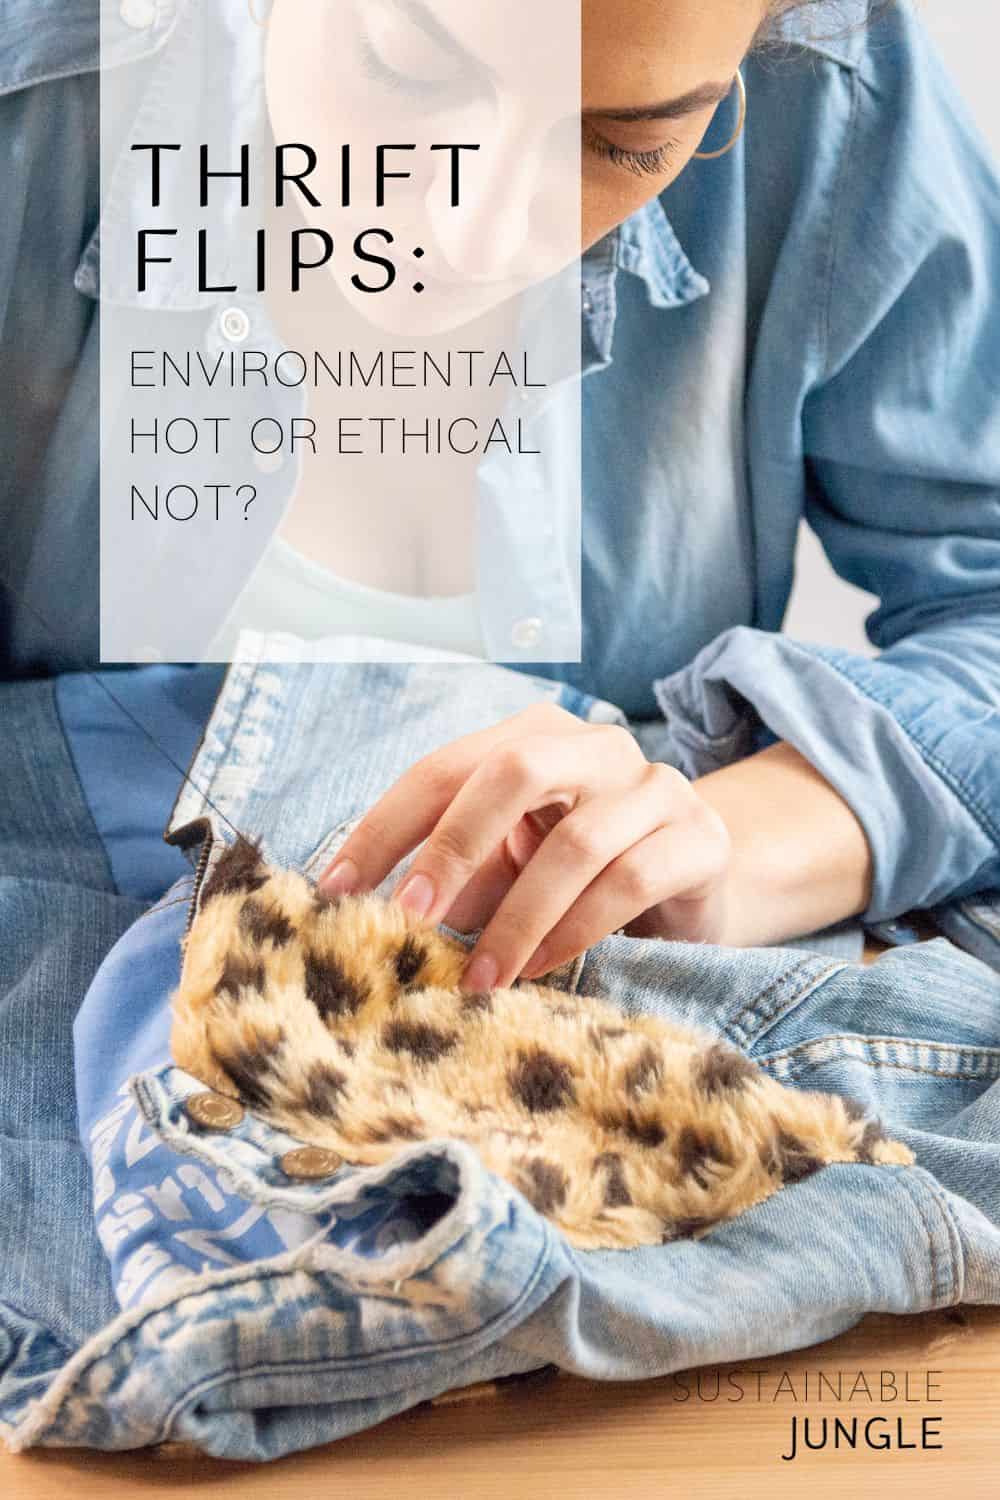 Thrift Flips: Environmental Hot or Ethical Not? Image by Uplight Pictures #thriftflips #isthriftflippingethical #thriftflipping #thriftflipclothes #thriftstoreflips #whatisthriftflipping #sustainablejungle